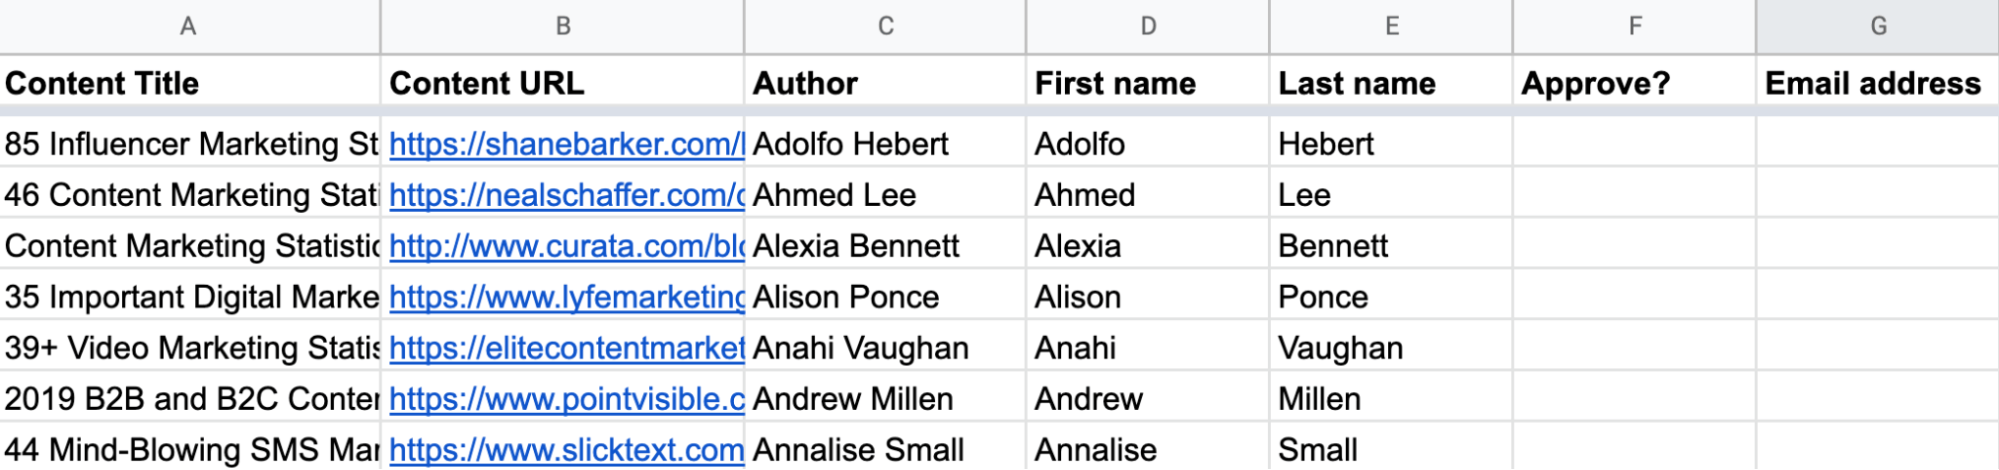 Adding of two new "Approve?" and "Email address" columns to Google Sheets